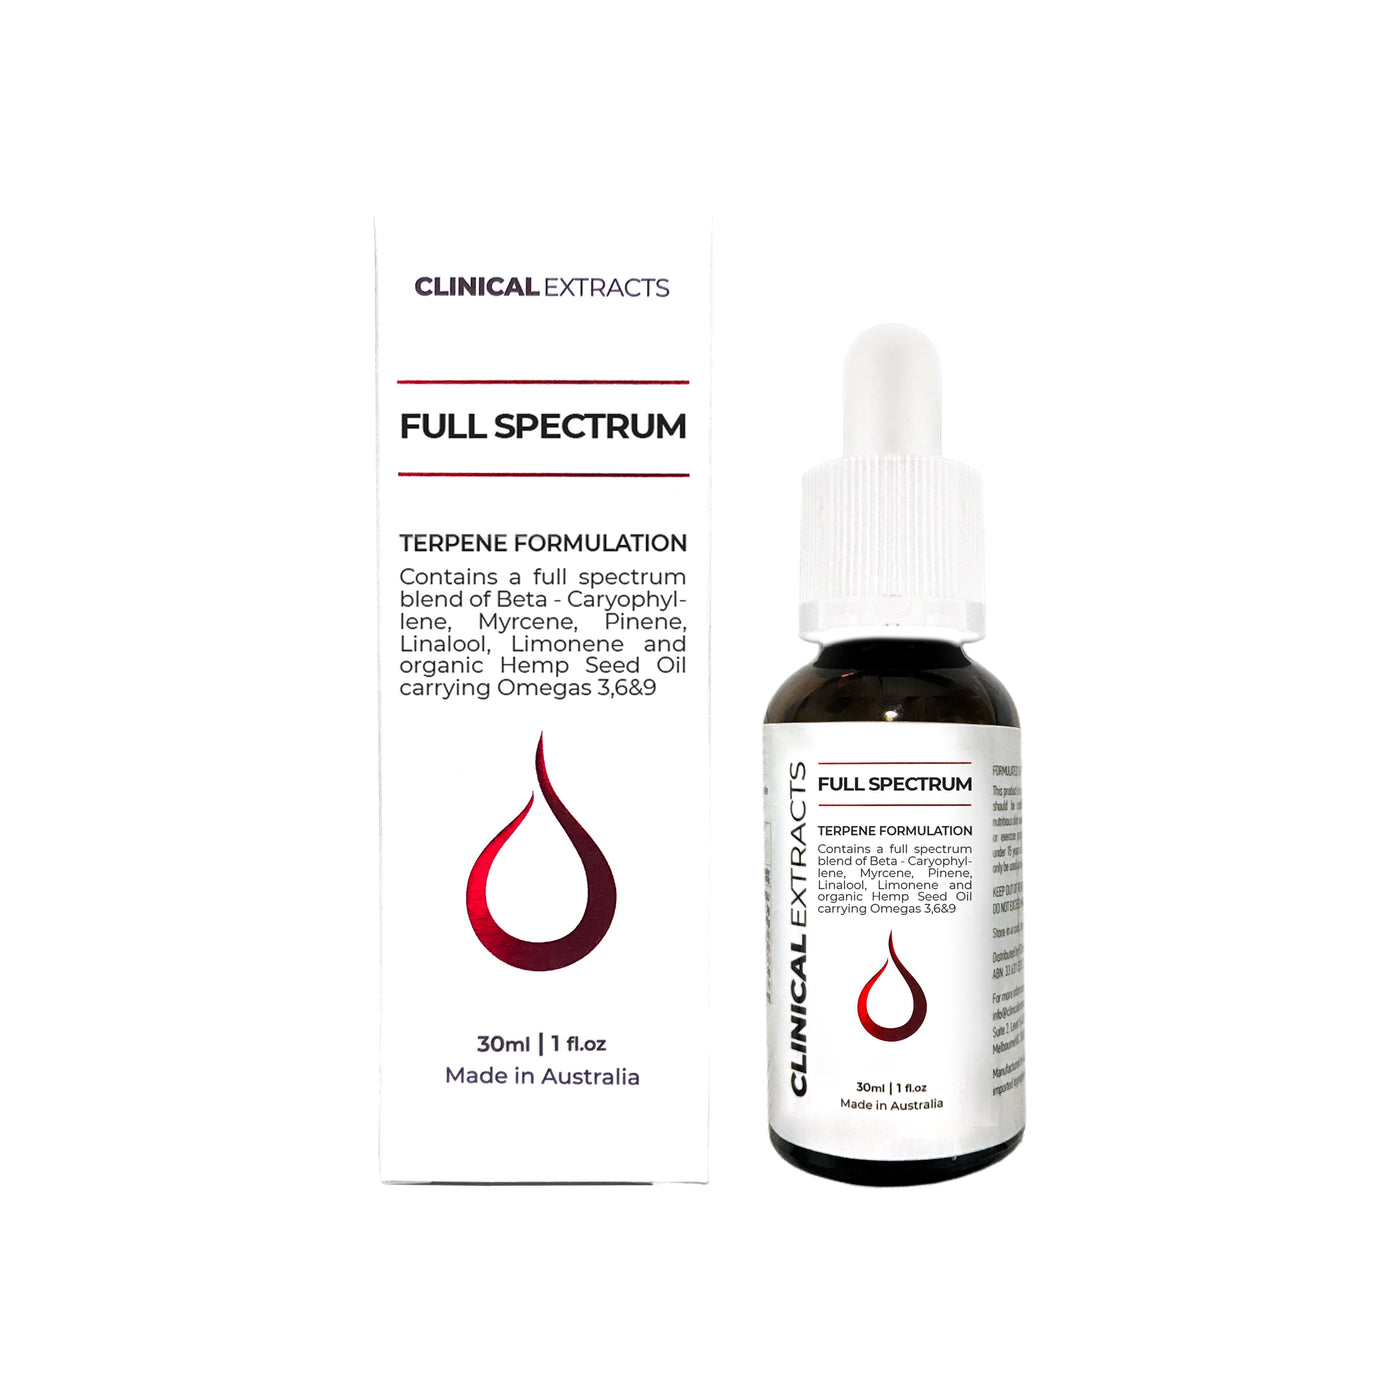 Clinical Extracts Full Spectrum Terpene Formulation 30mL